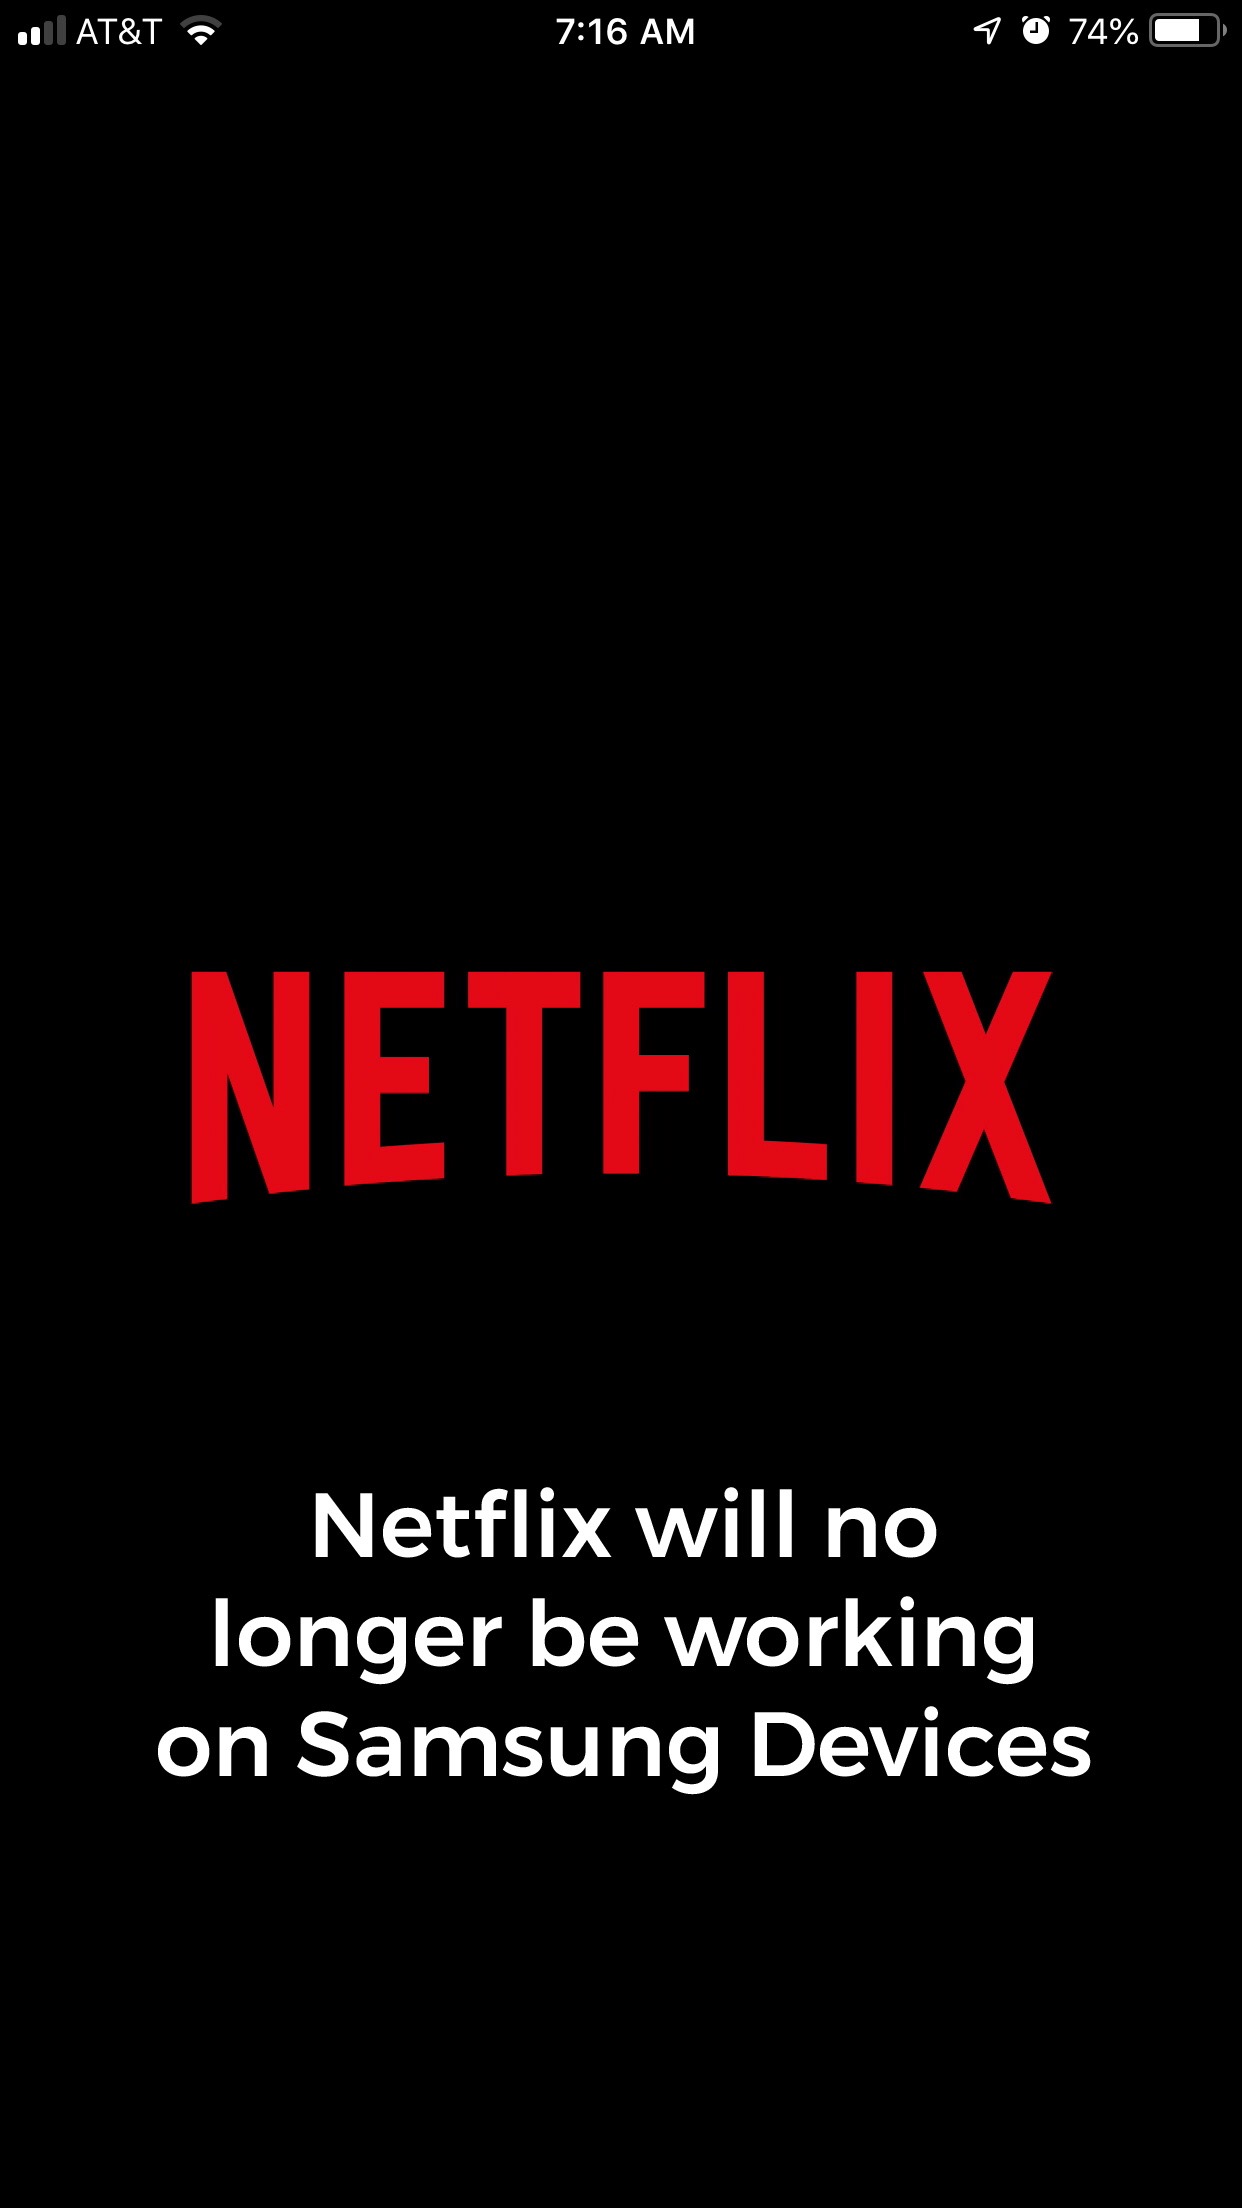 netflix - 11 At&T 1074% O Netflix Netflix will no longer be working on Samsung Devices